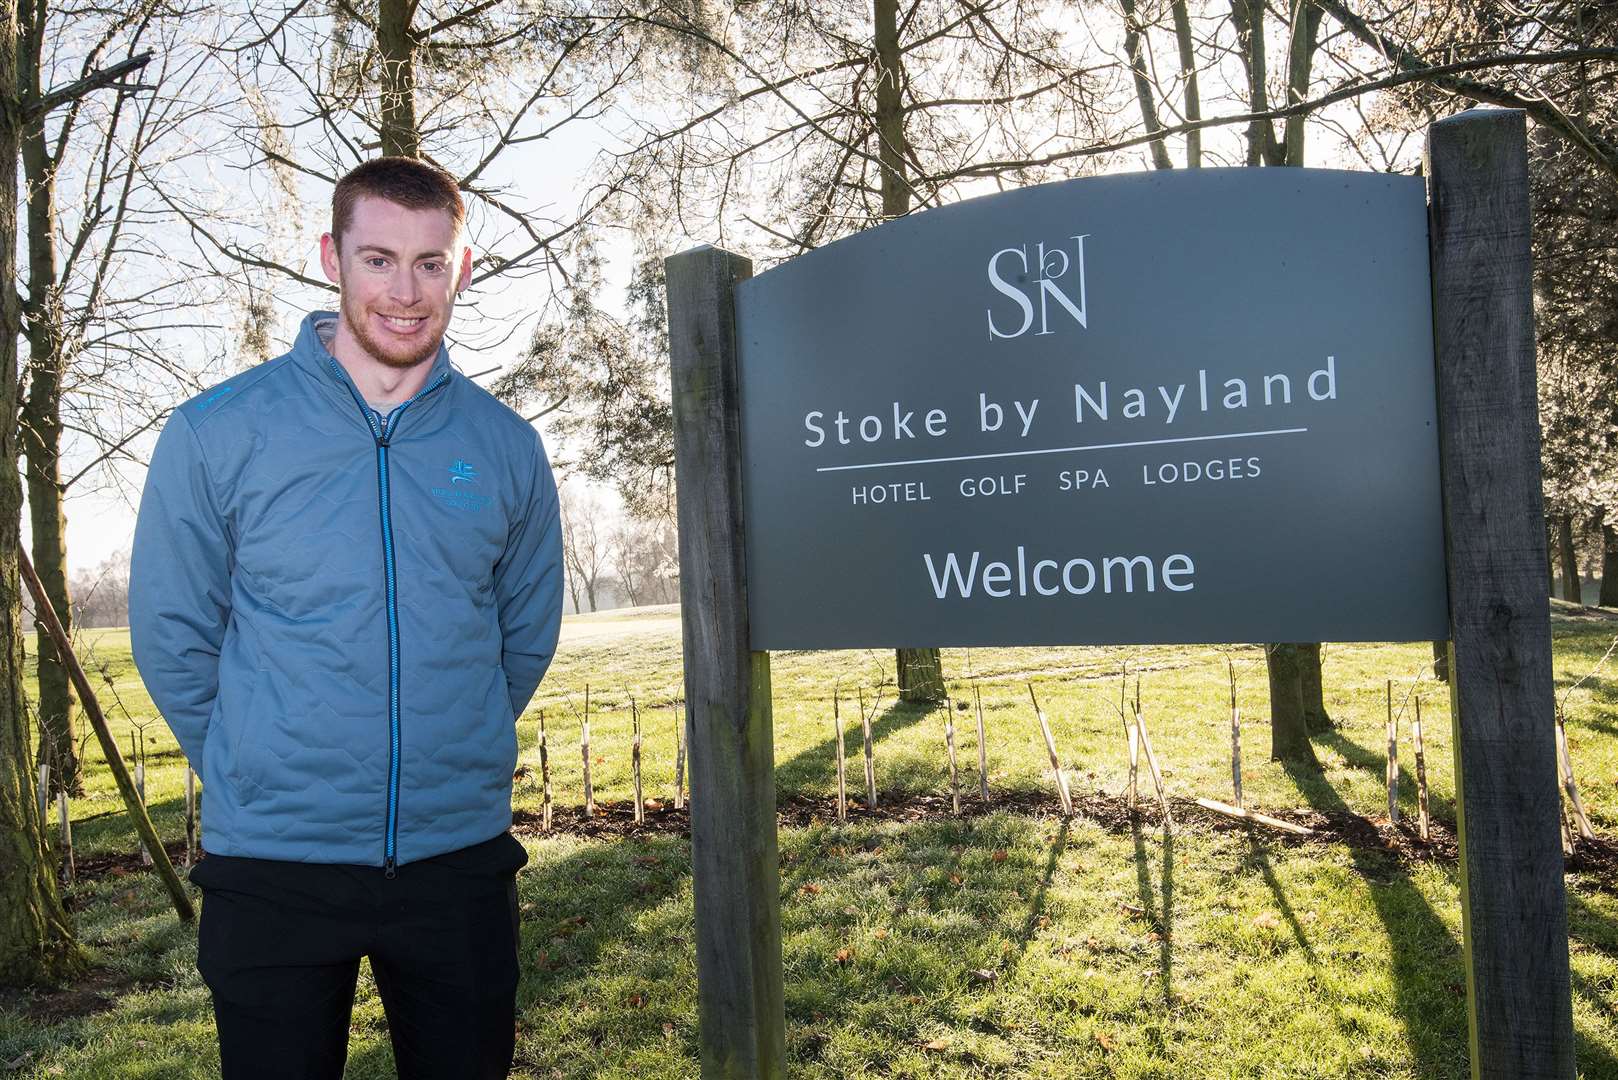 59club Spotlight on Service as told by Karl Hepple of Stoke by Nayland